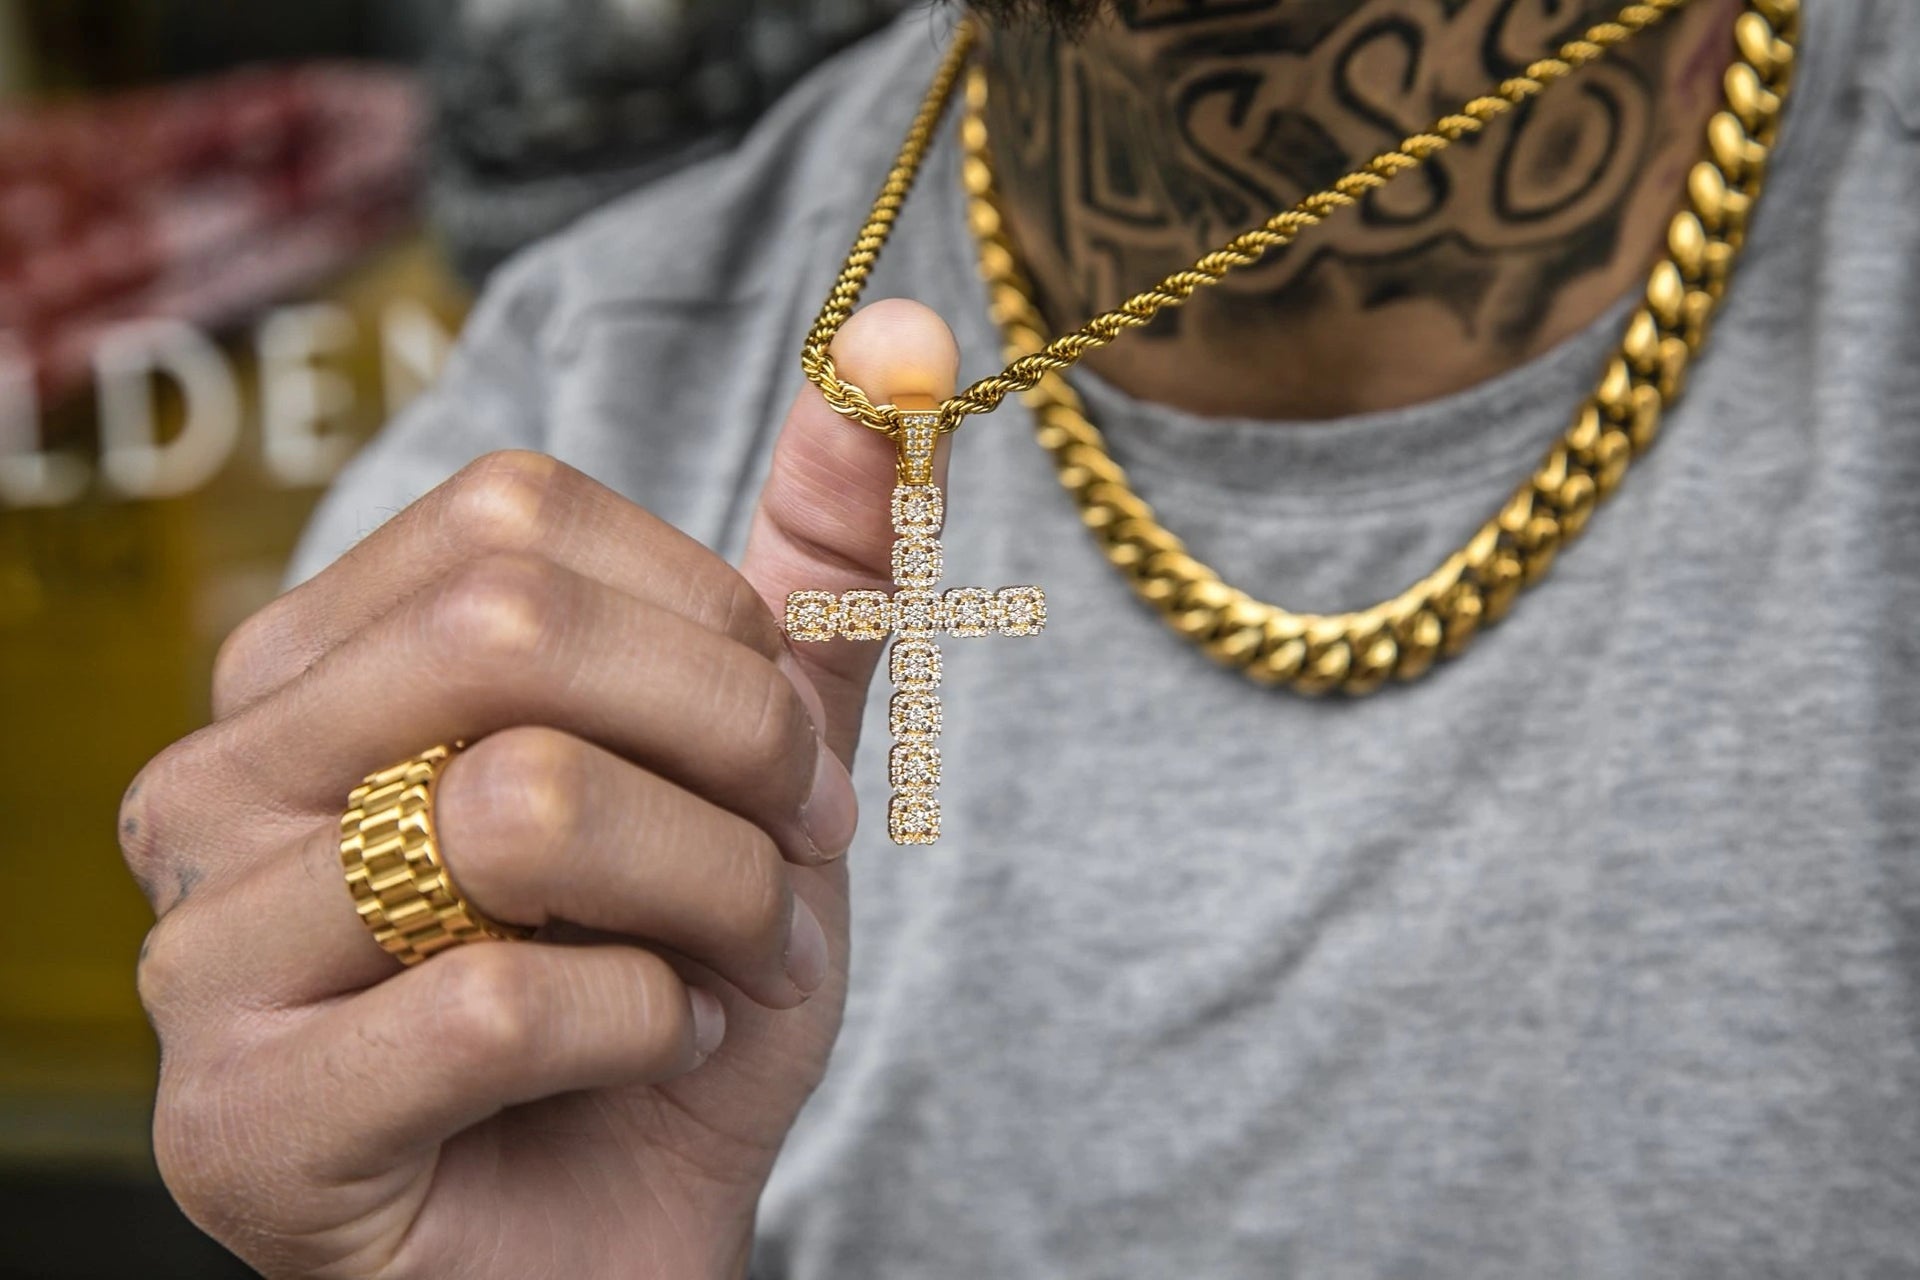 The chain on the Iced Out 18K Gold Plated Clustered Cross Pendant | Golden Gilt being pulled